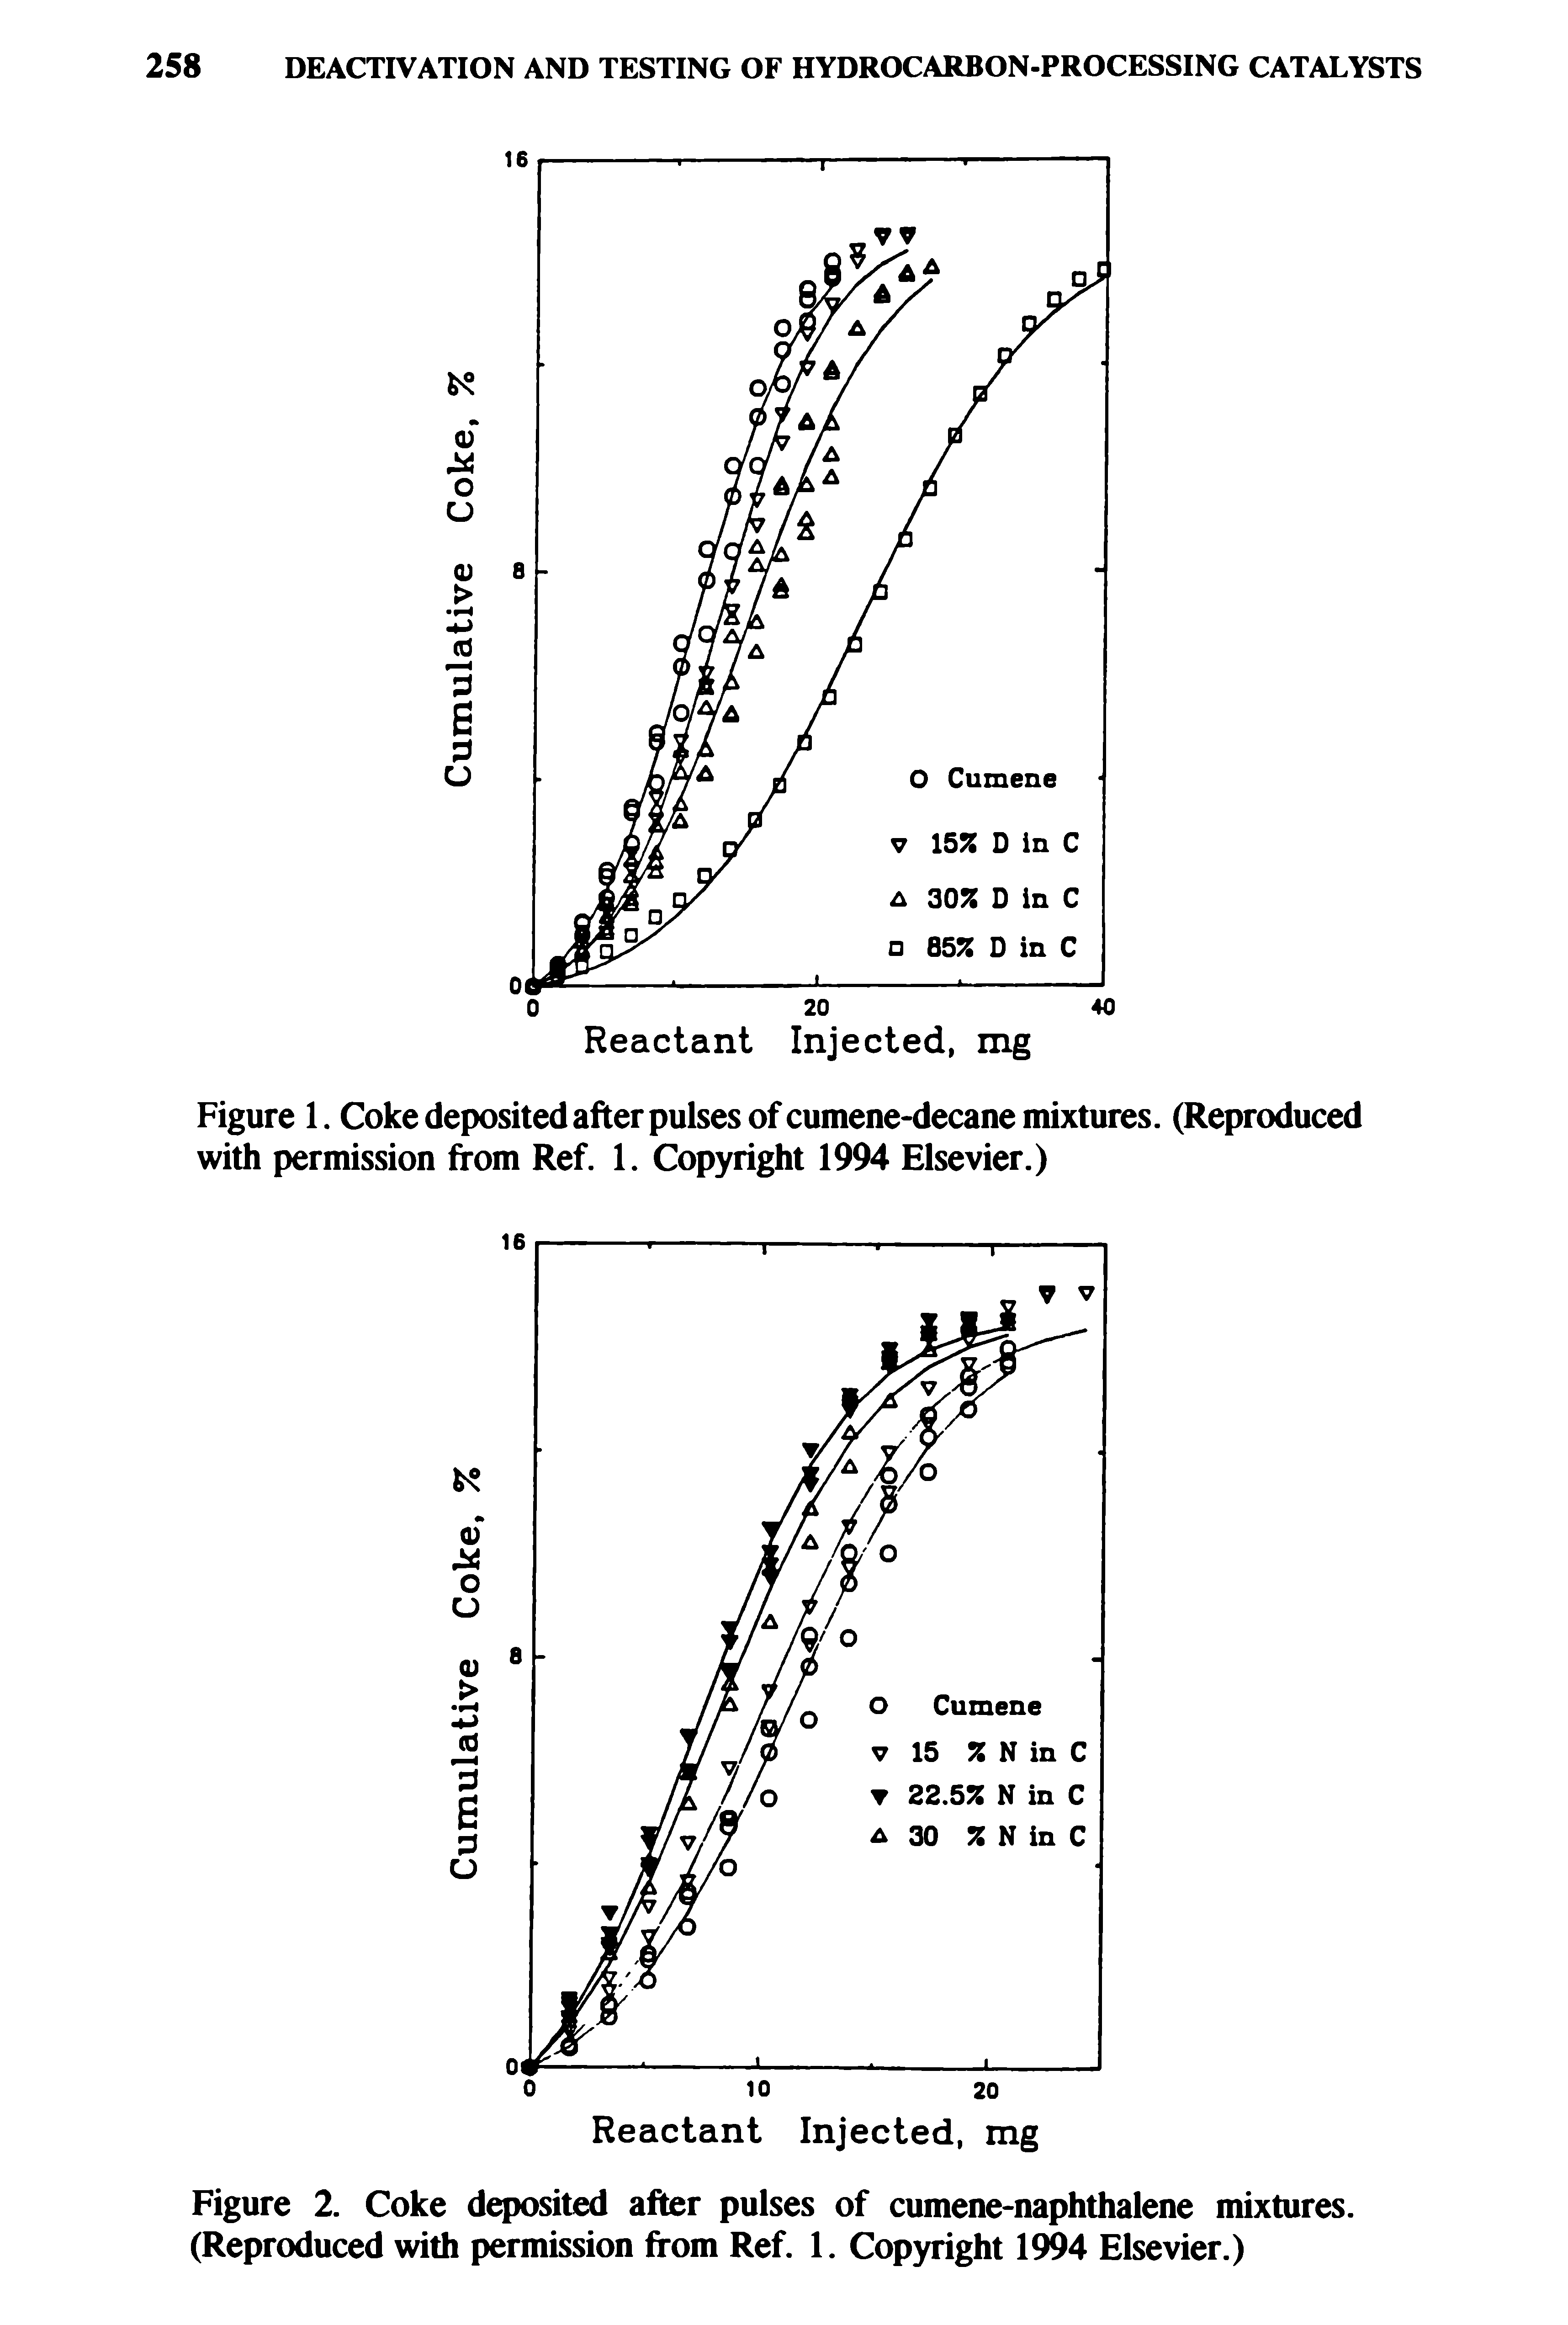 Figure 2. Coke deposited after pulses of cumene-naphthalene mixtures. (Reproduced with permission from Ref. 1. Copyright 1994 Elsevier.)...